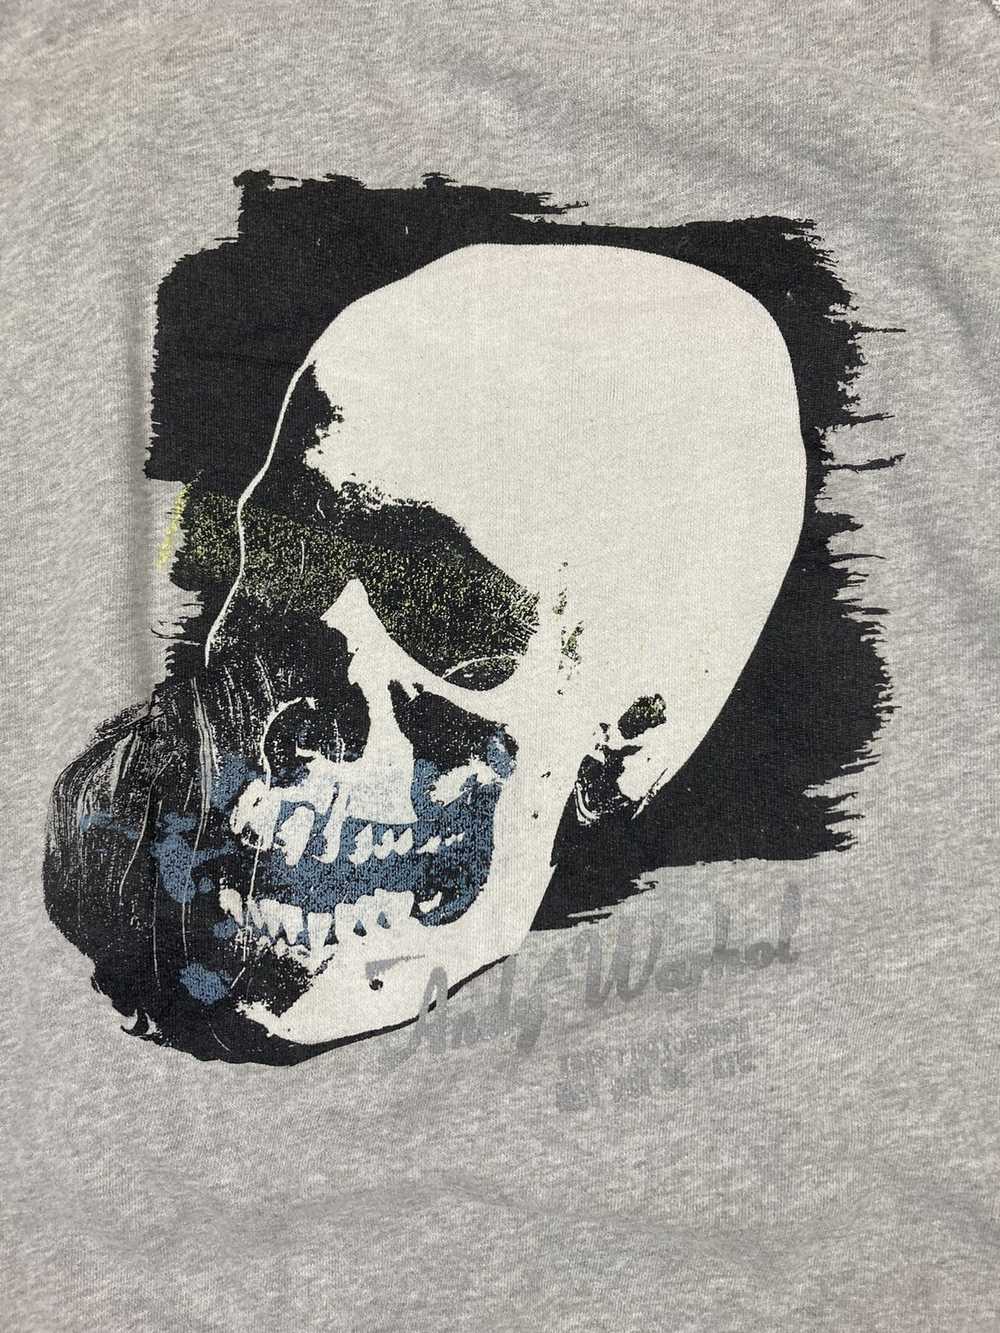 Andy Warhol × Pepe Jeans Andy Warhol Skull Sweater - image 5